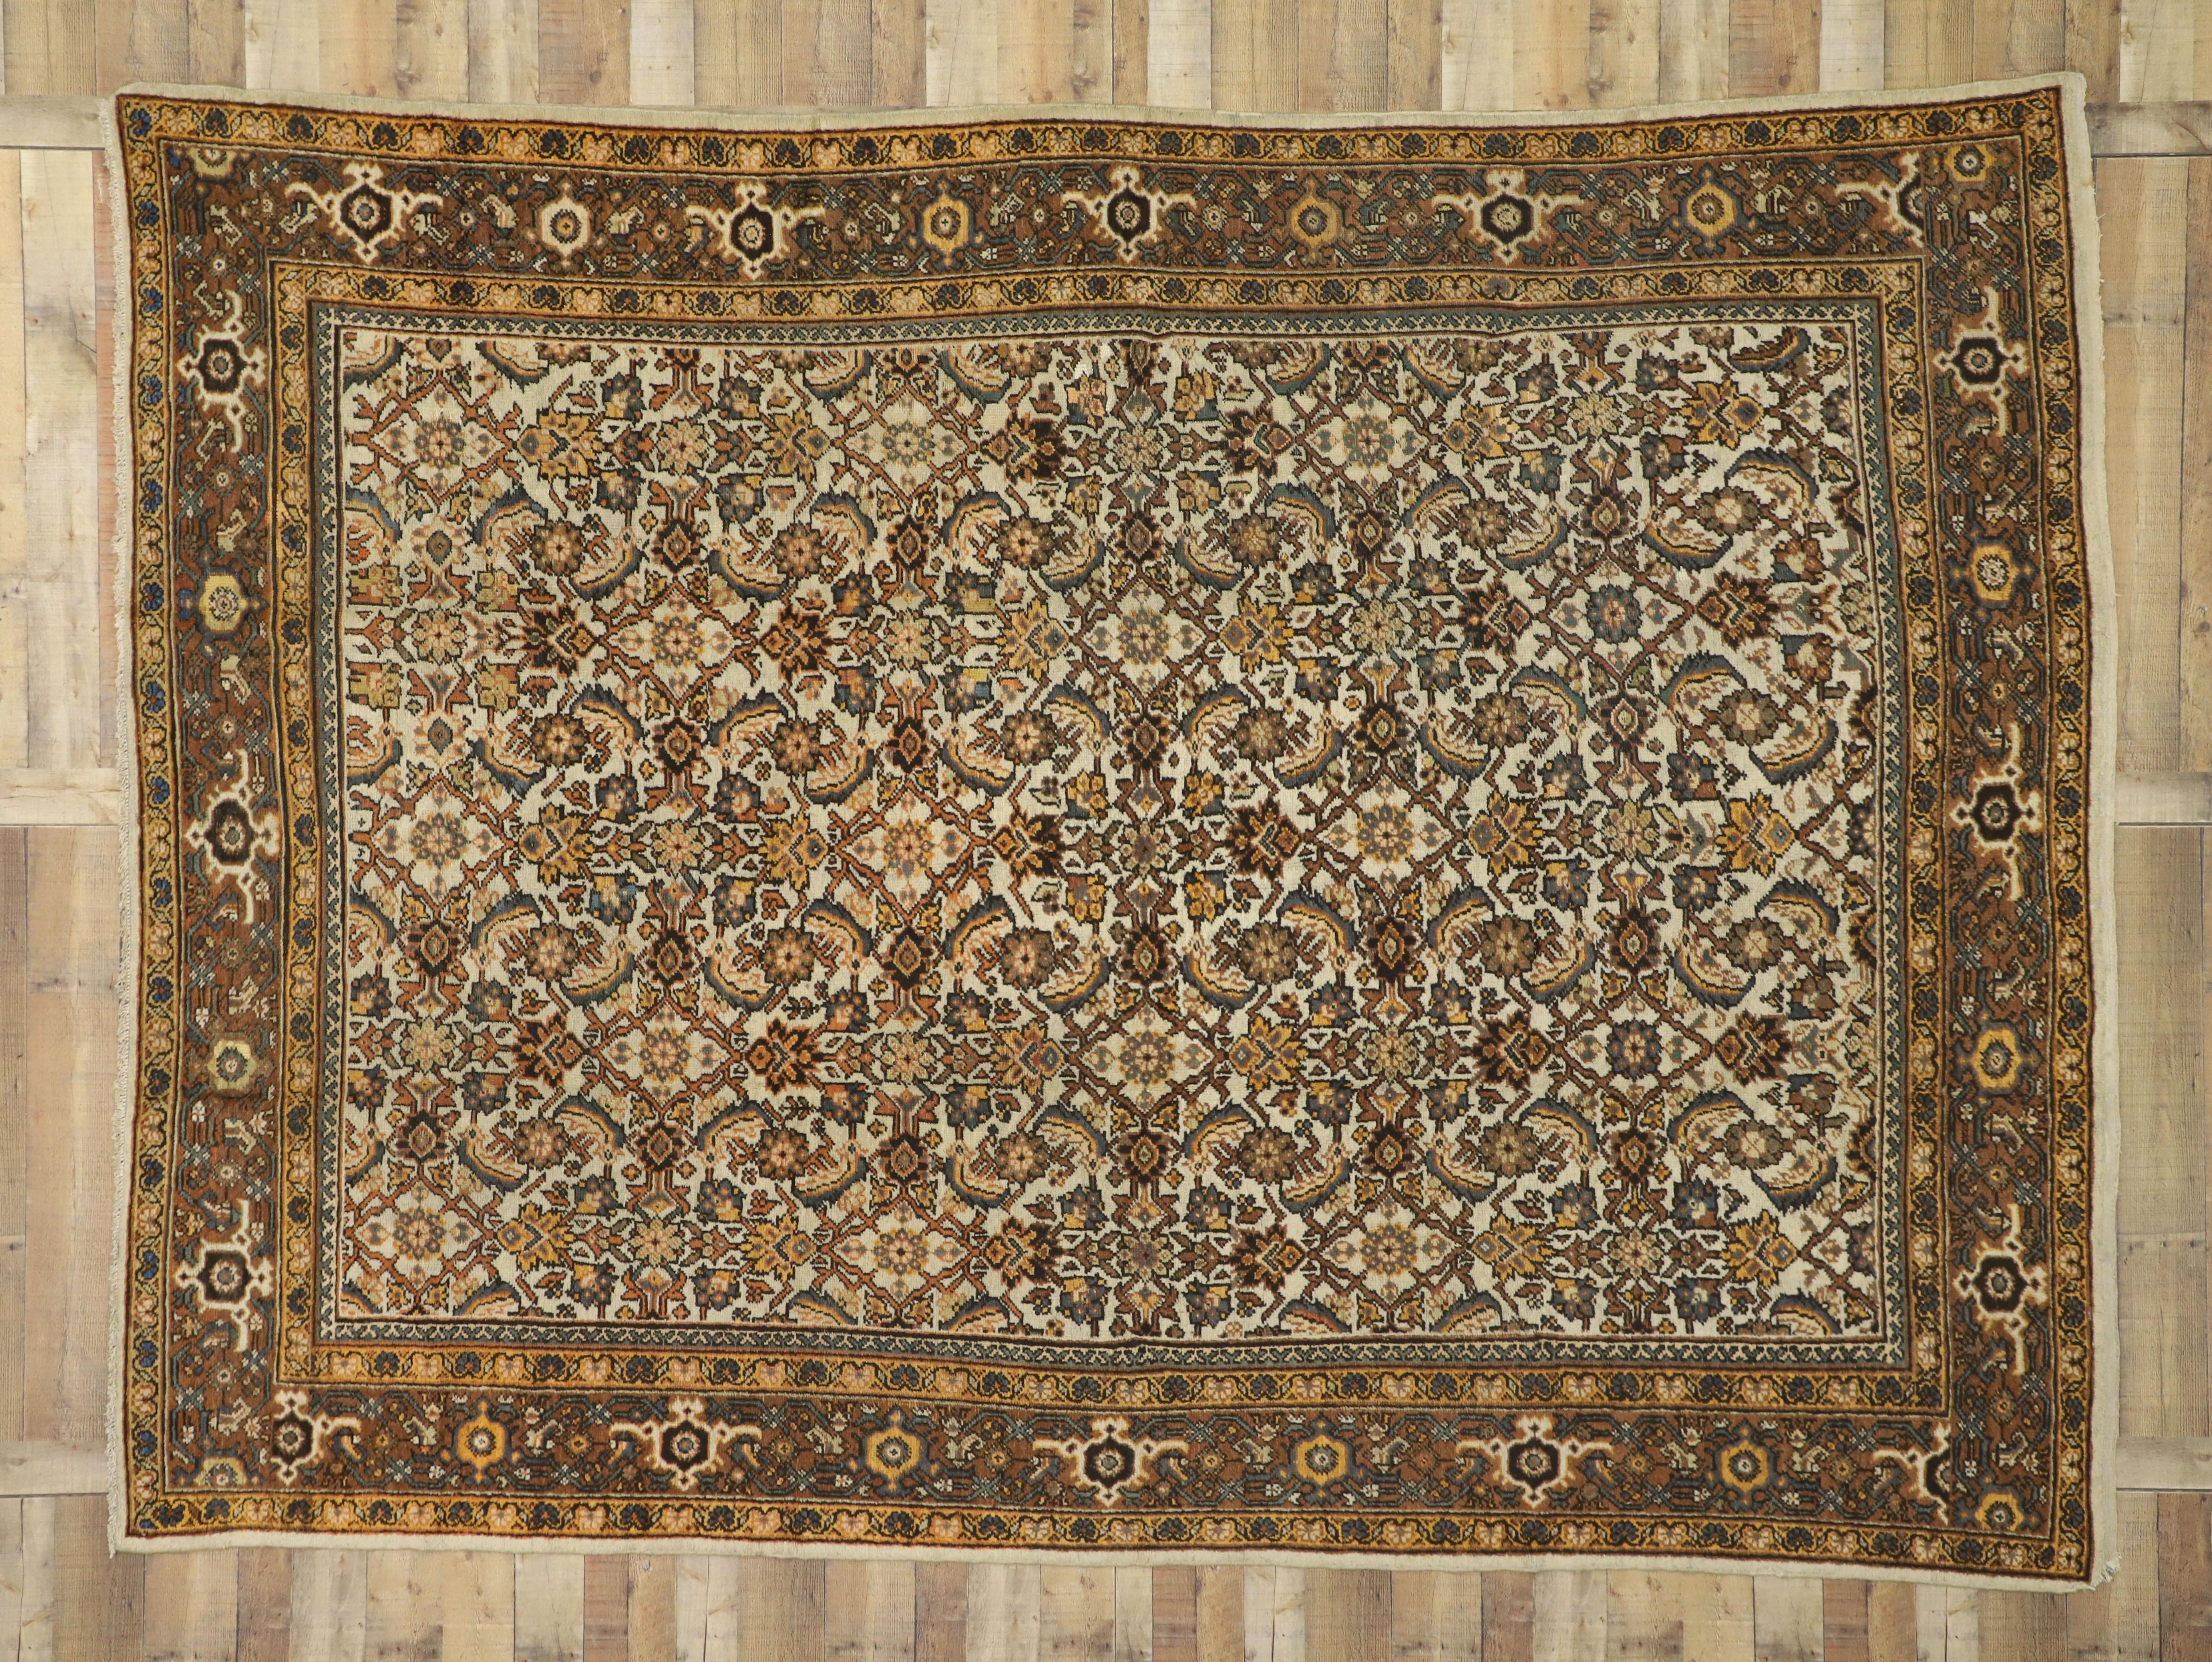 20th Century Antique Persian Mahal Rug with Herati Pattern and Rustic Arts & Crafts Style For Sale